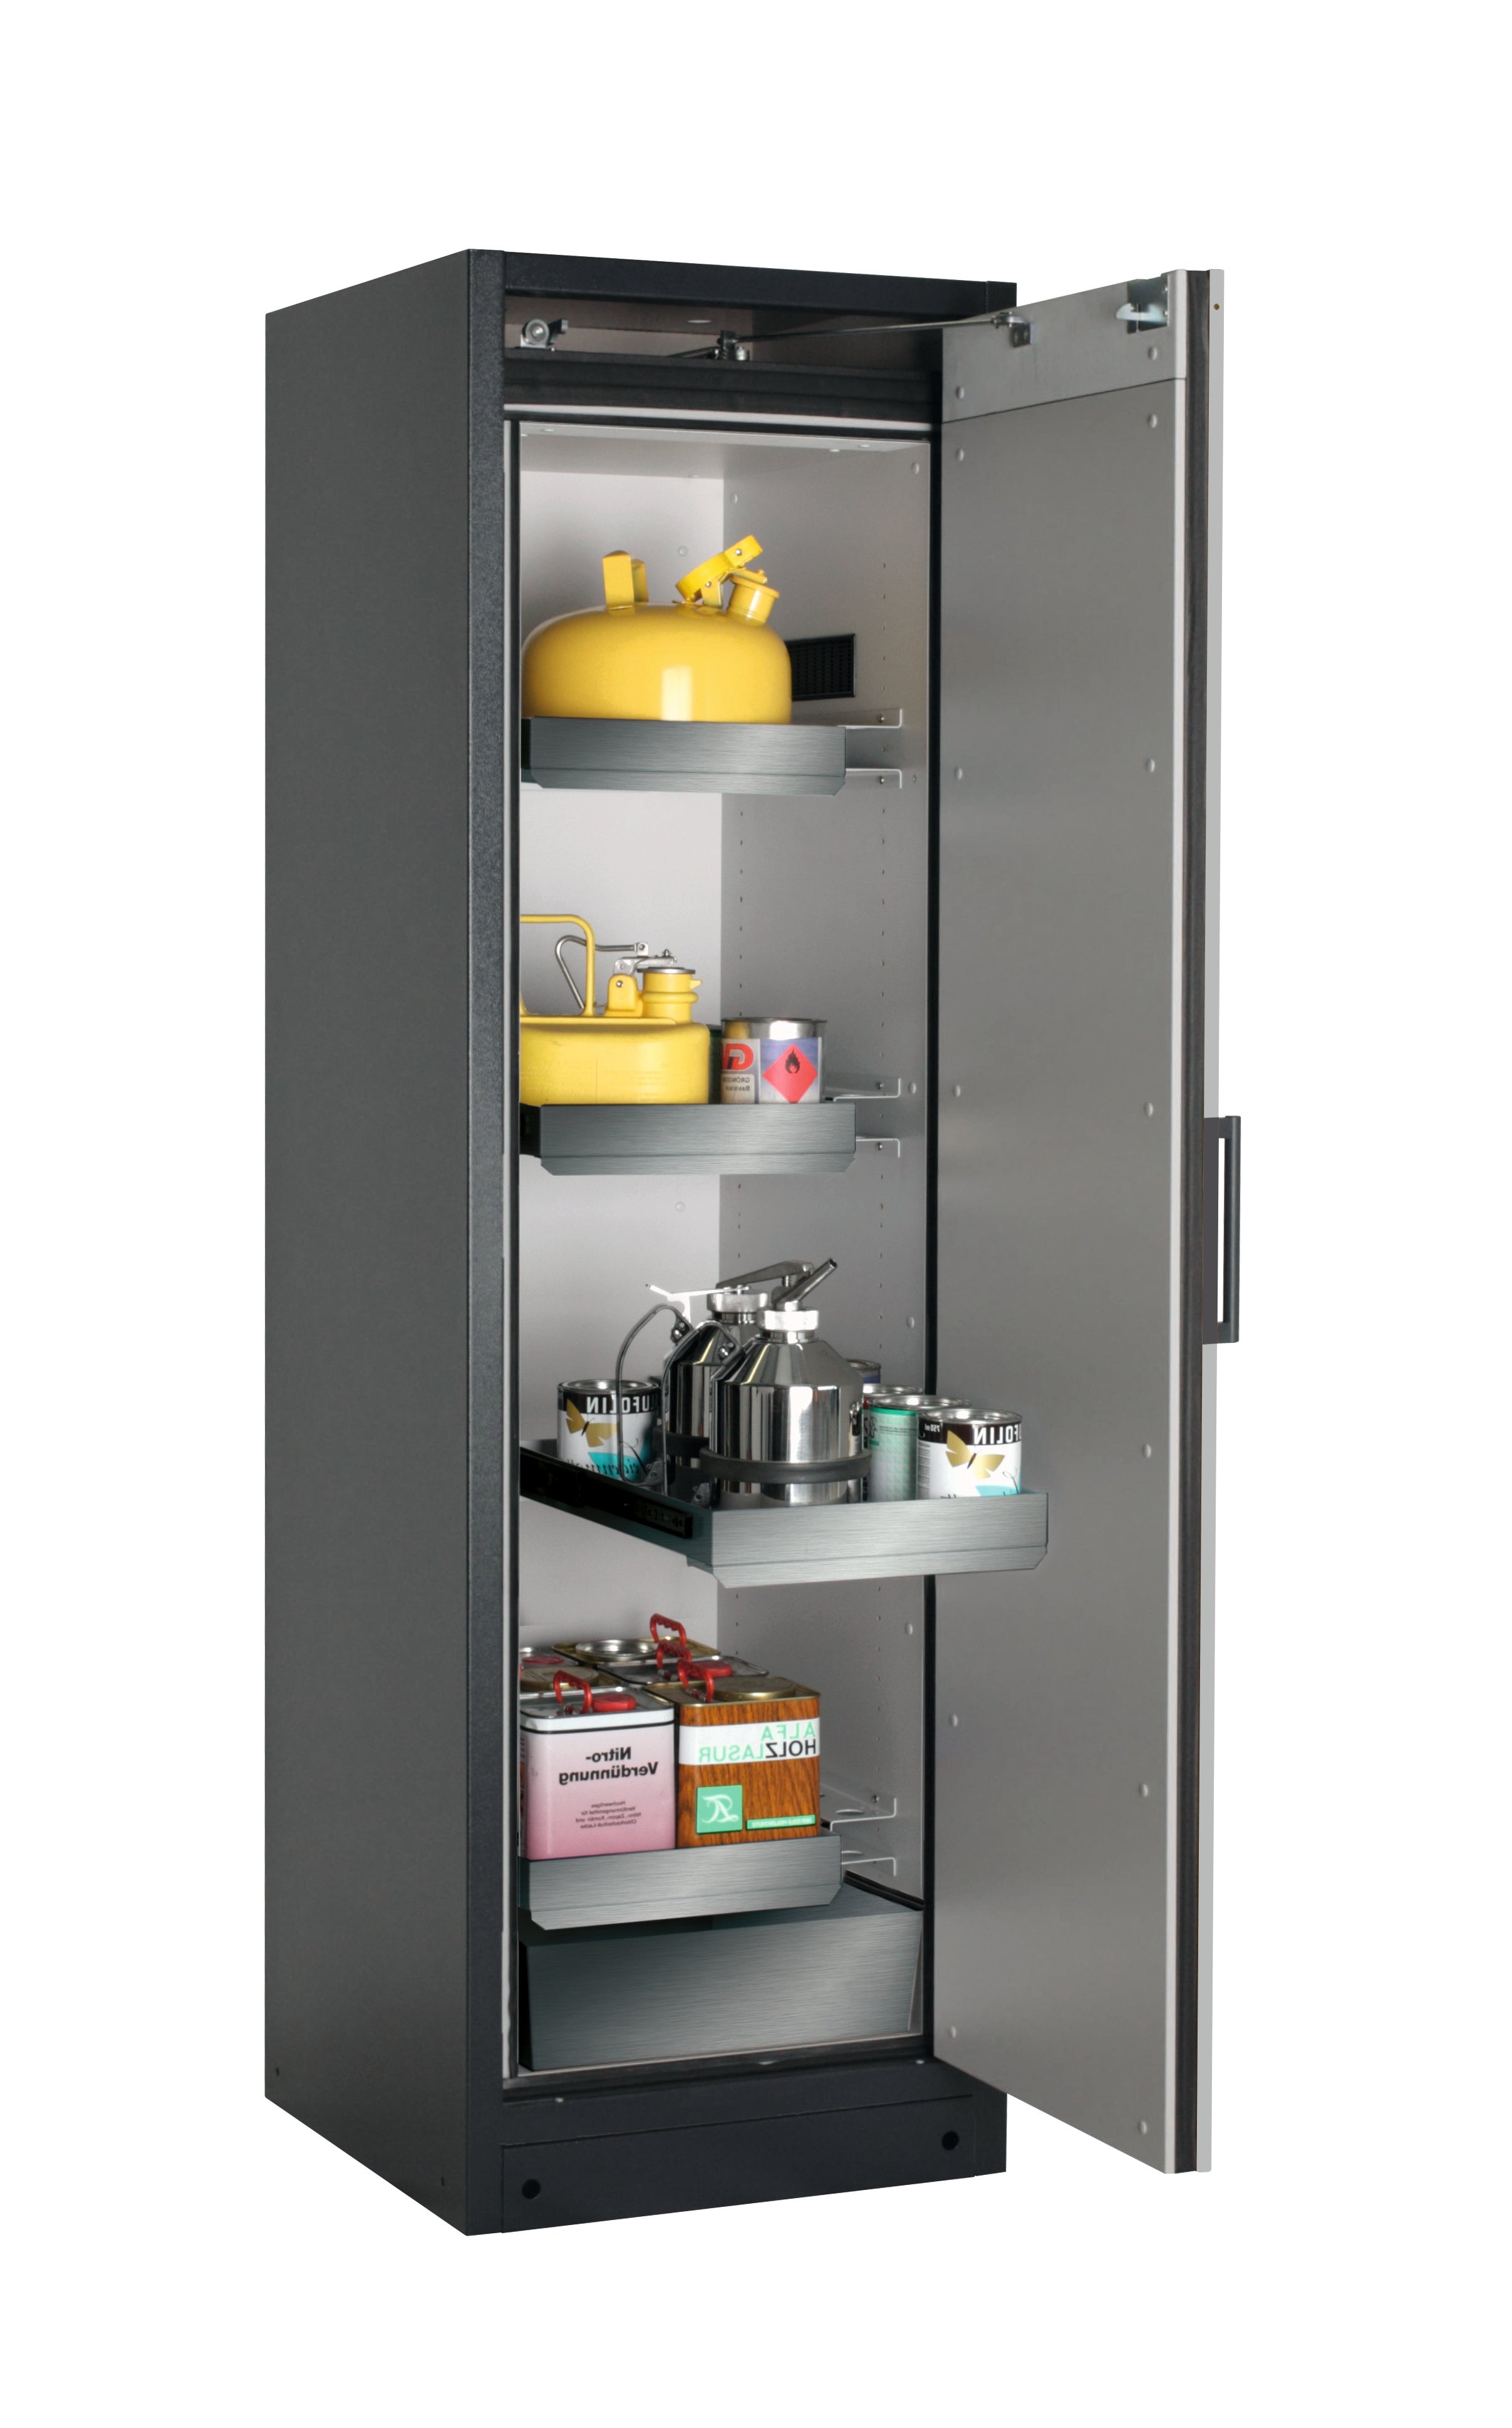 Type 90 safety storage cabinet Q-CLASSIC-90 model Q90.195.060.R in pure white RAL 9010 with 3x drawer (standard) (stainless steel 1.4301),